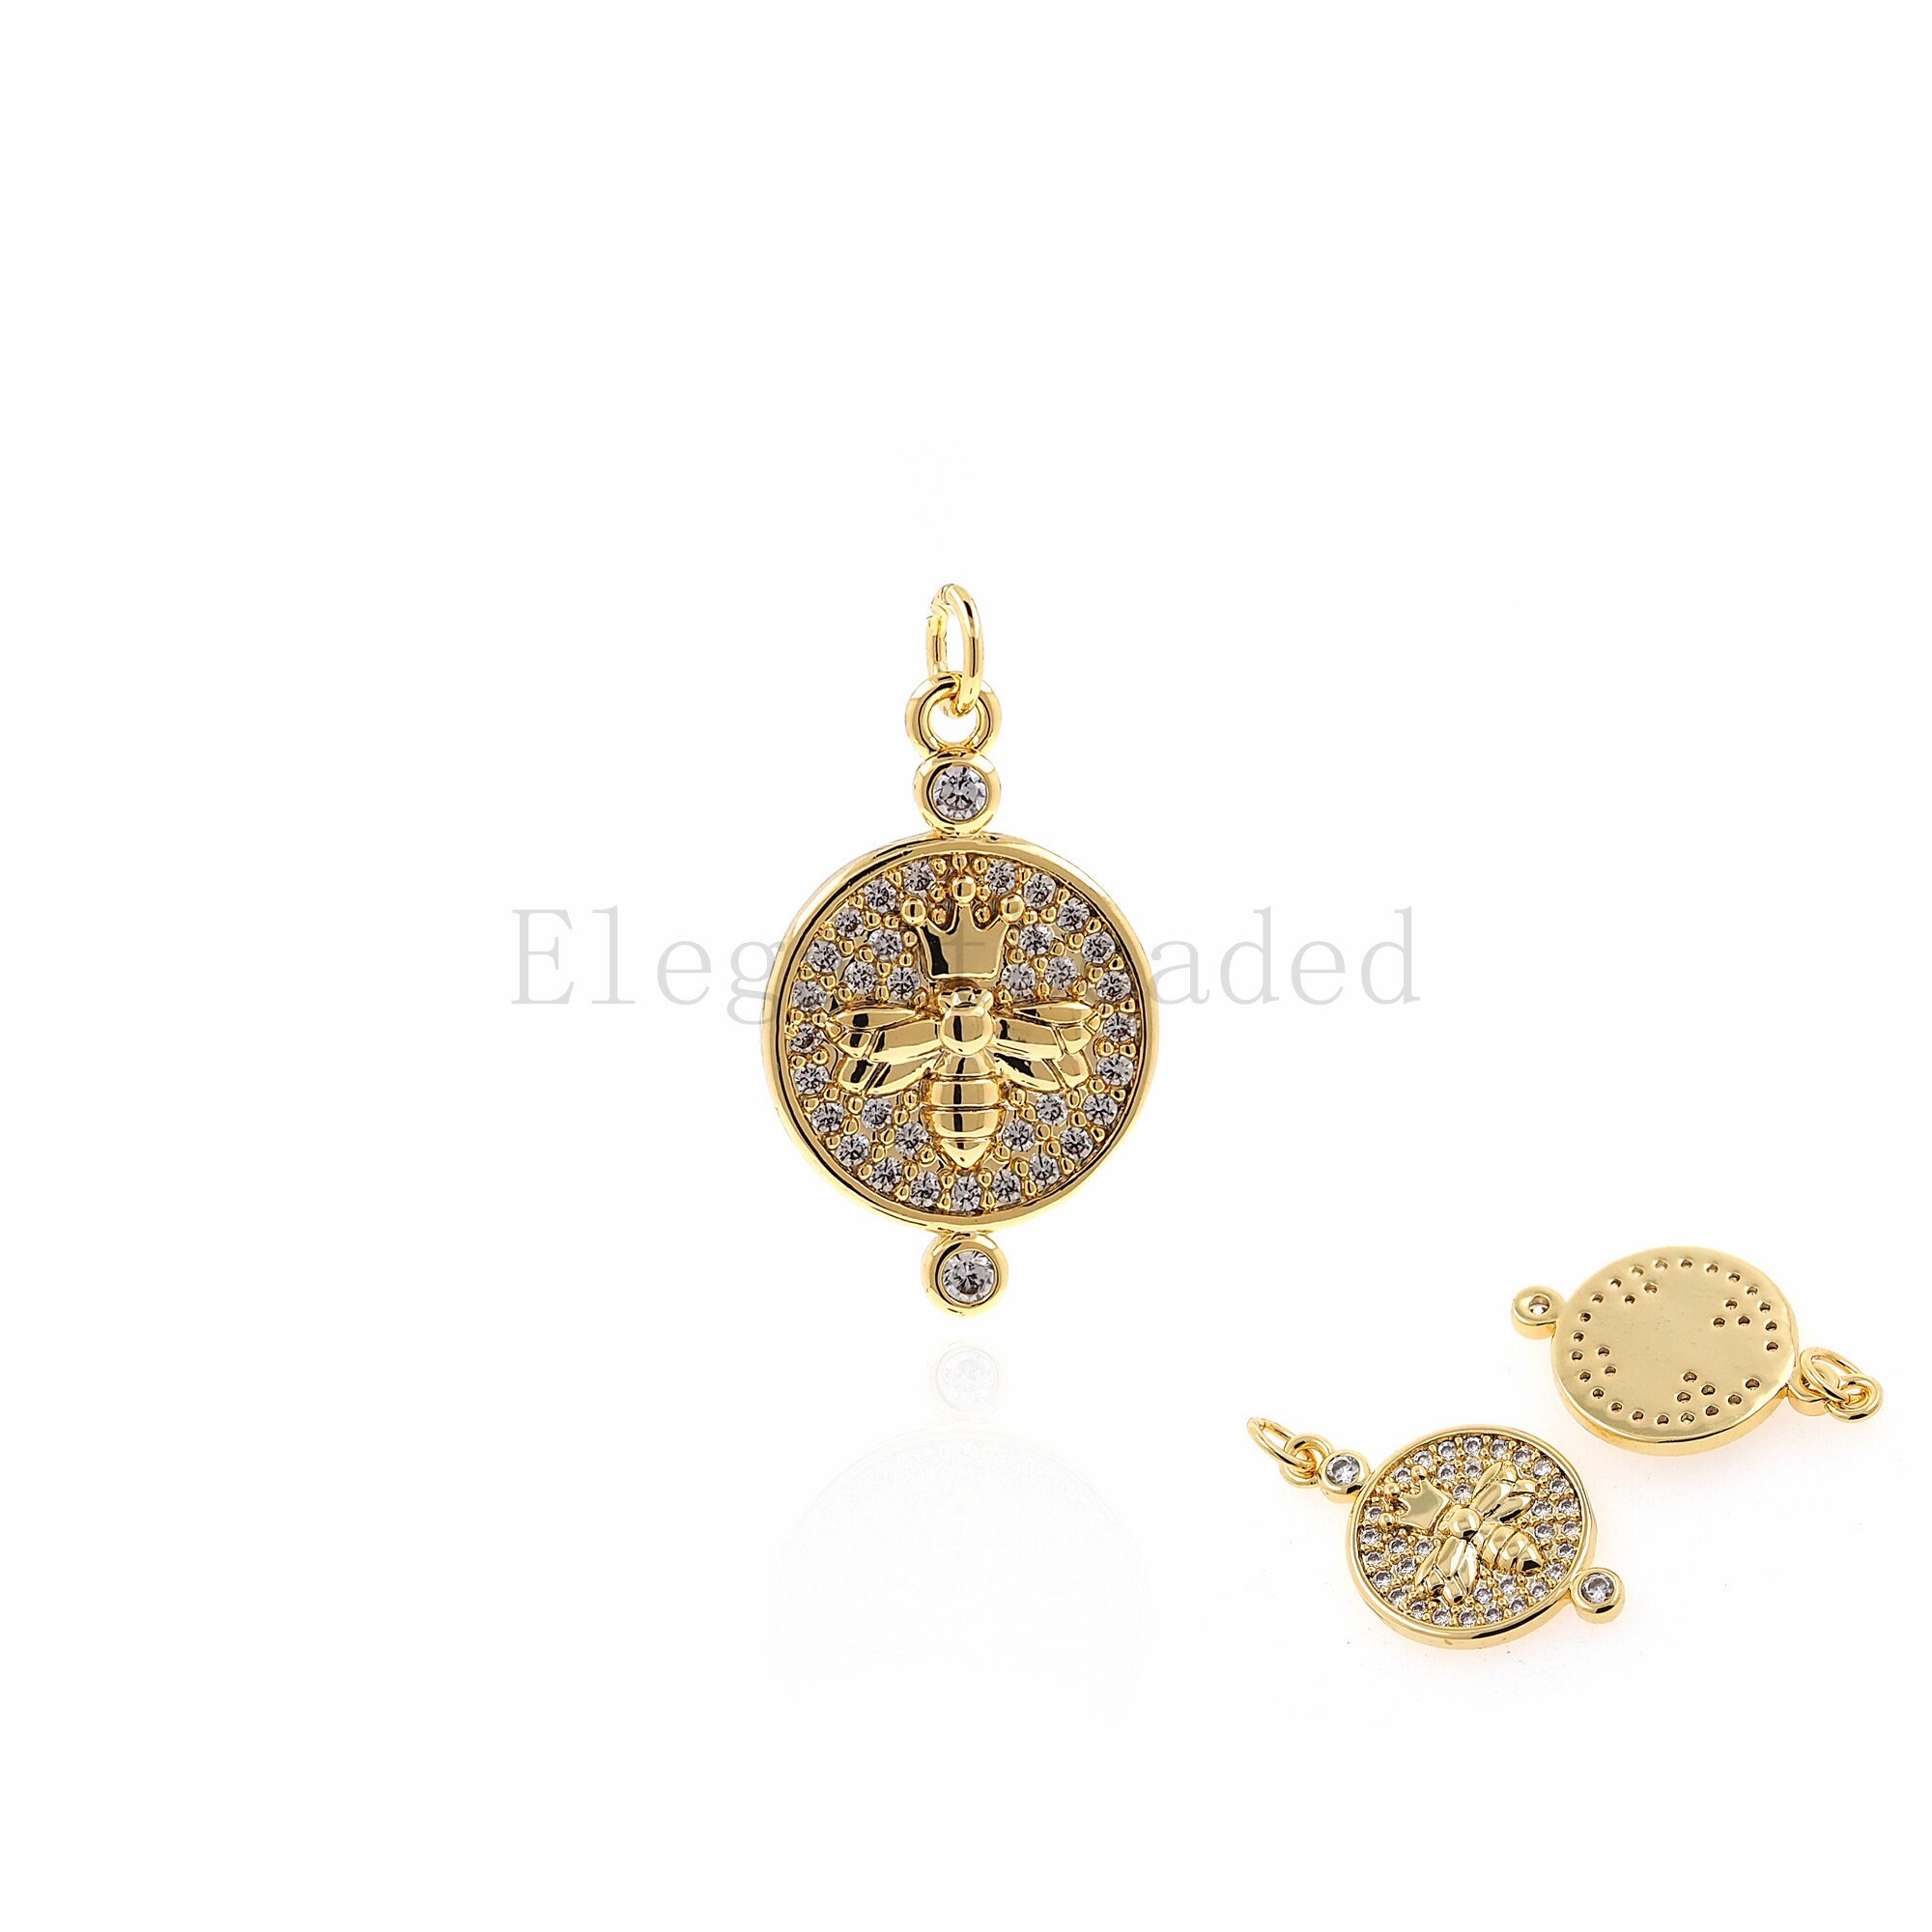 Round Bee Pendant,Insect Charm Necklace,DIY Jewelry Supply 25x14x2.5mm